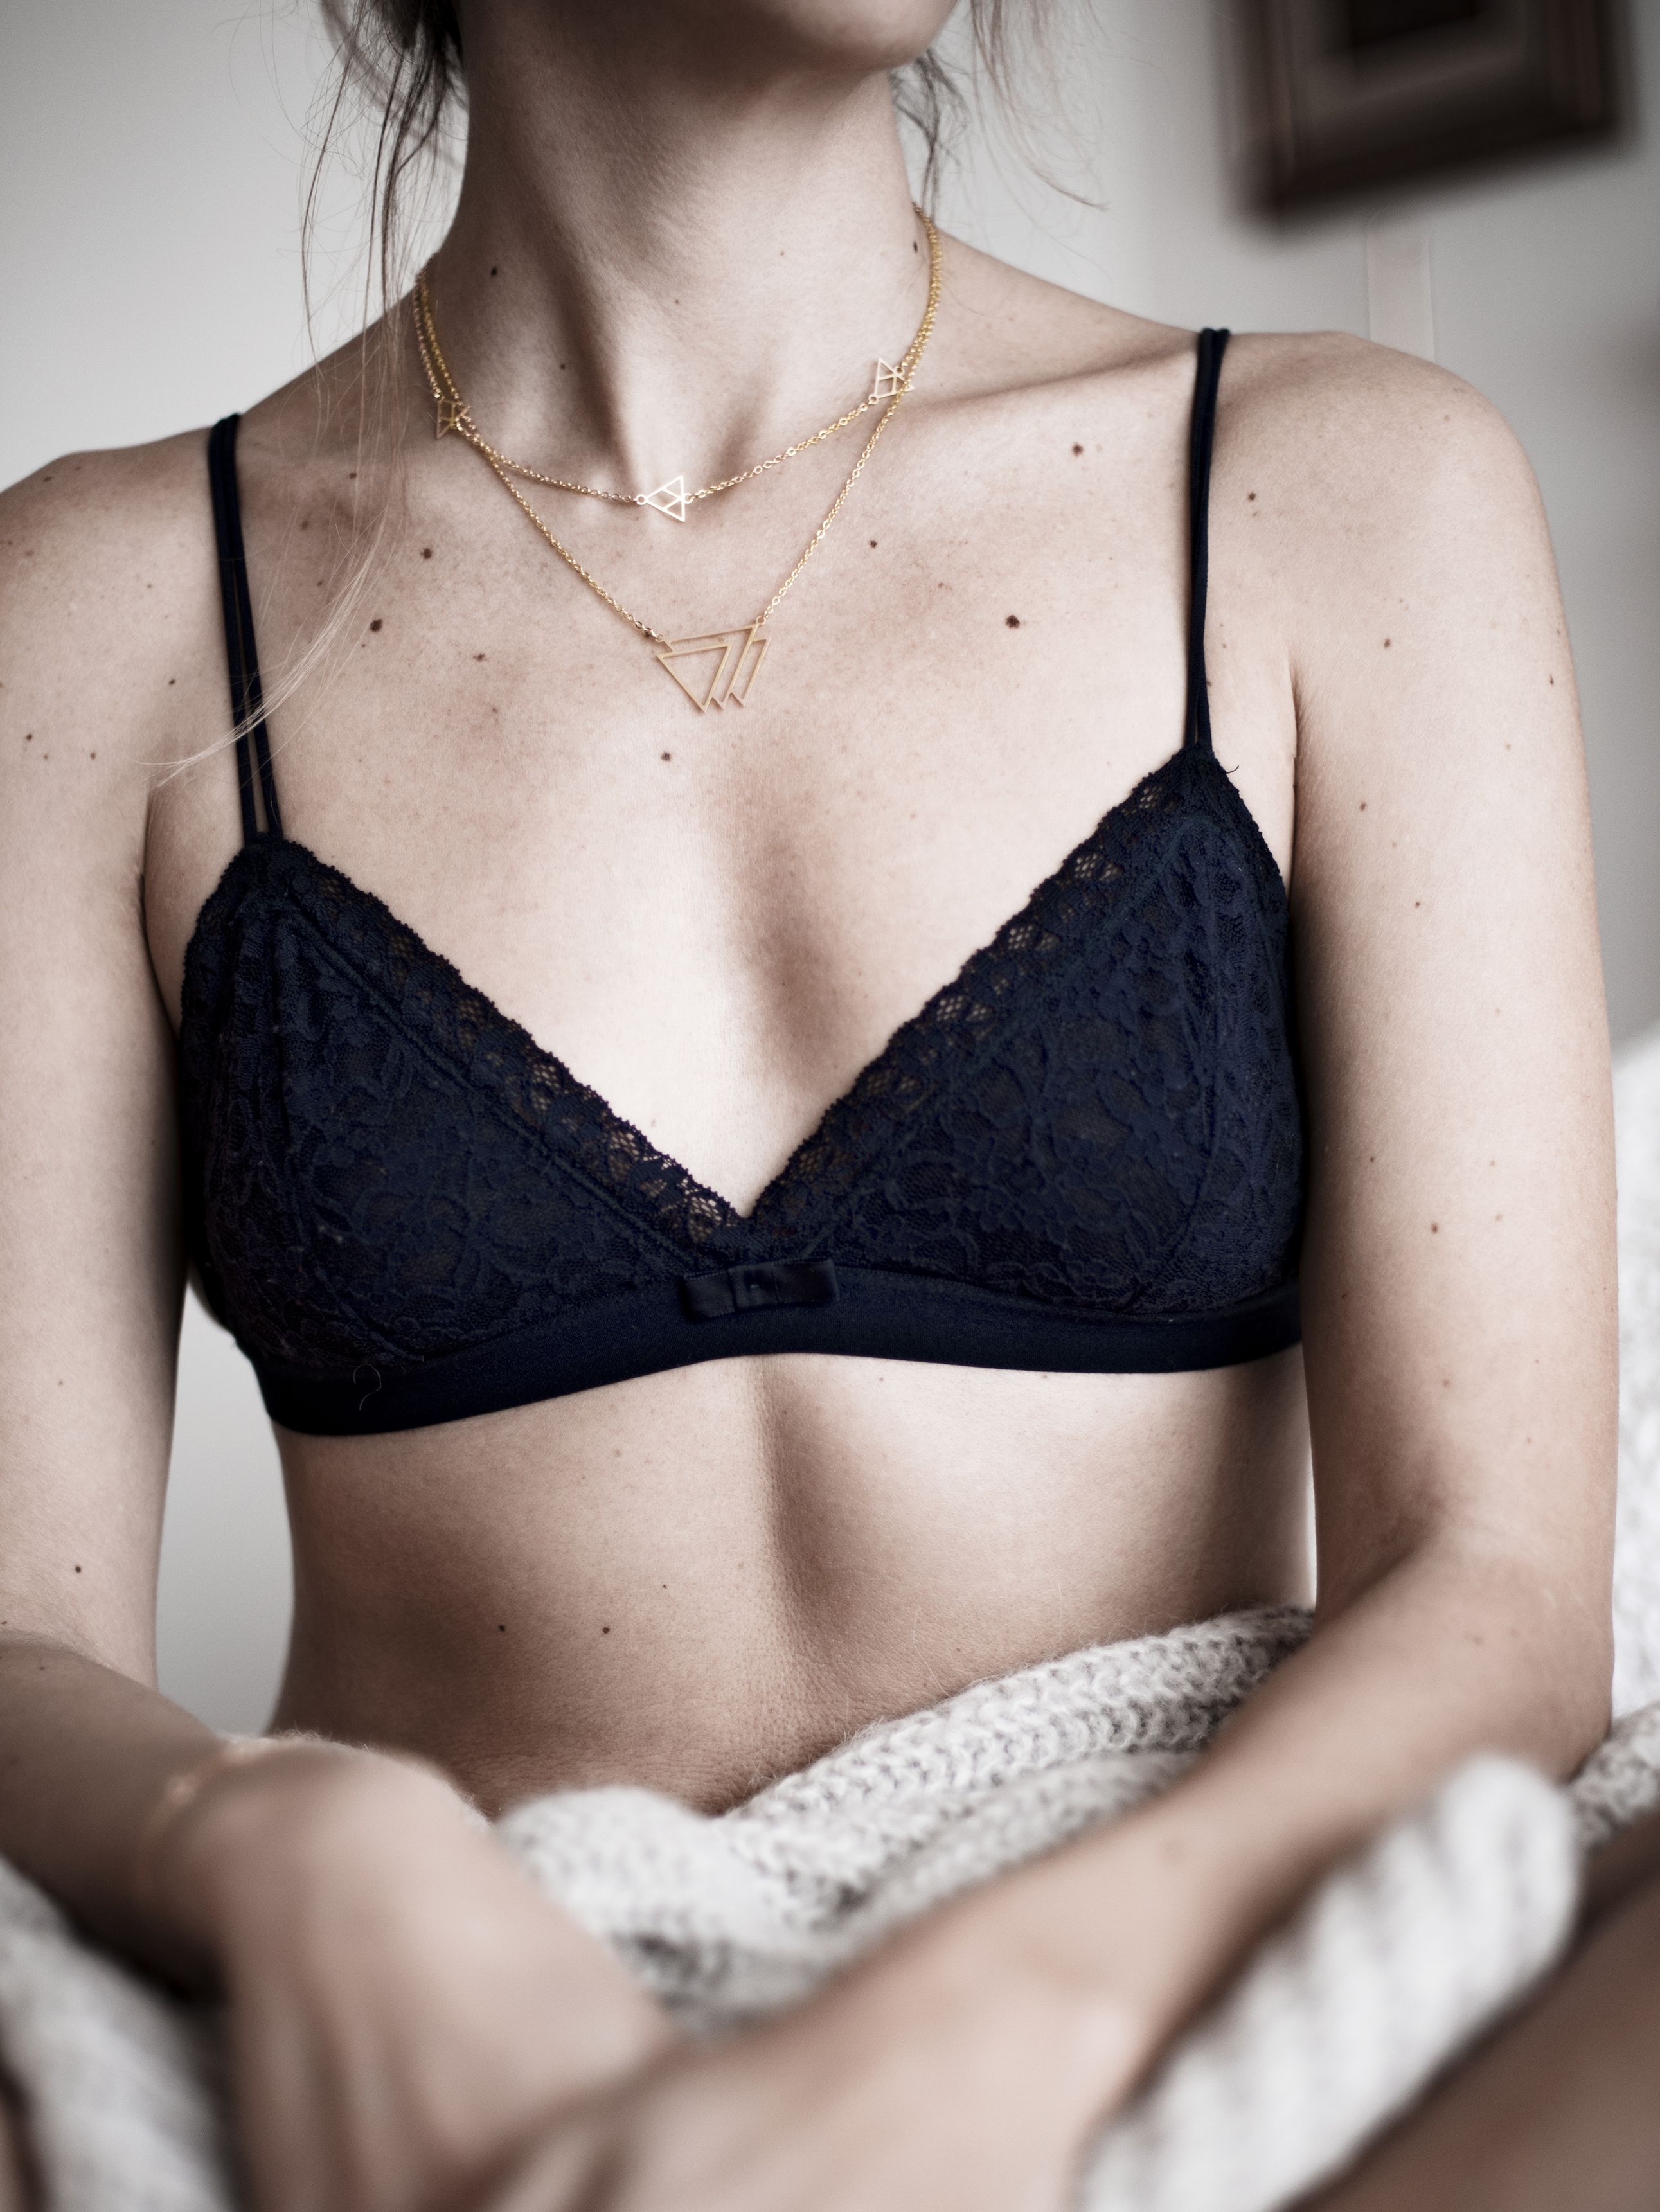 Braless: Pros And Cons Of Not Wearing A Bra